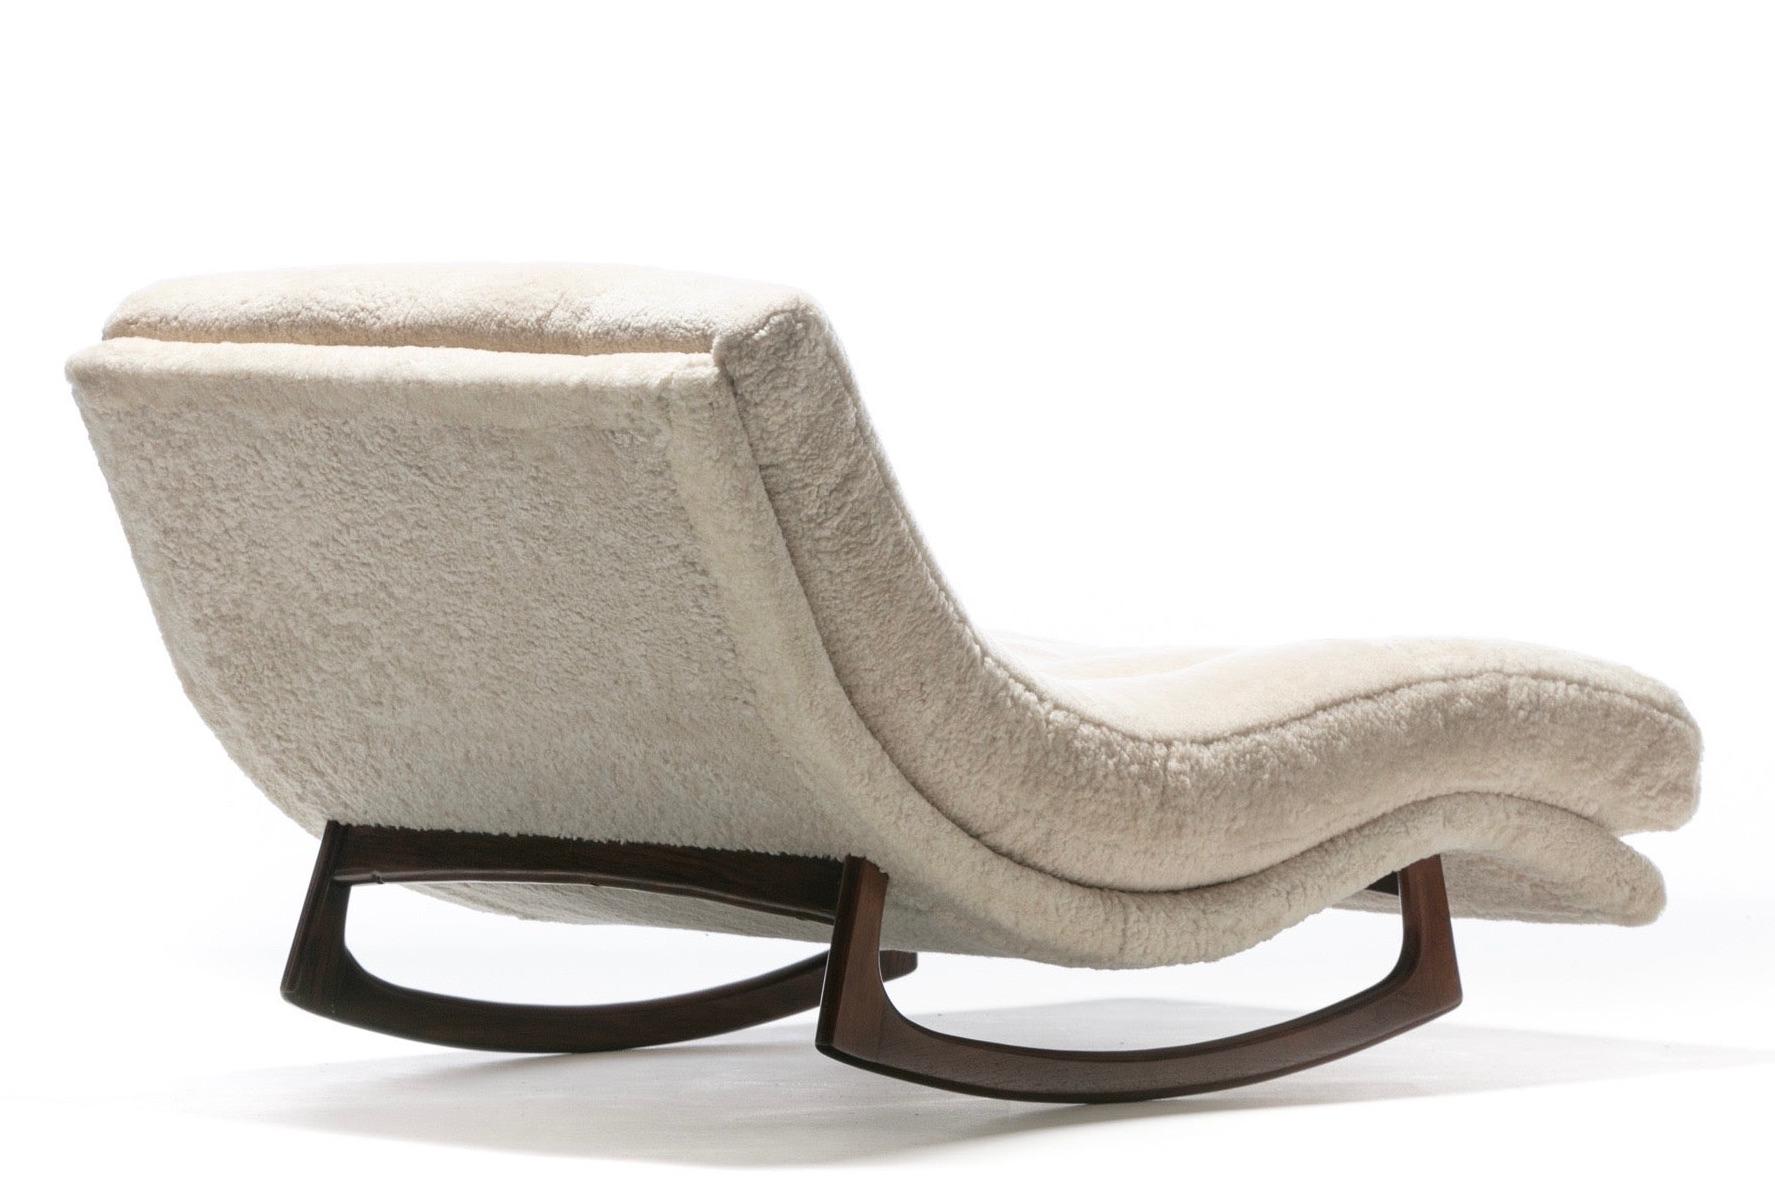 Adrian Pearsall Waive Chaise Rocker Lounge in Ivory Shearling with Walnut Legs 1